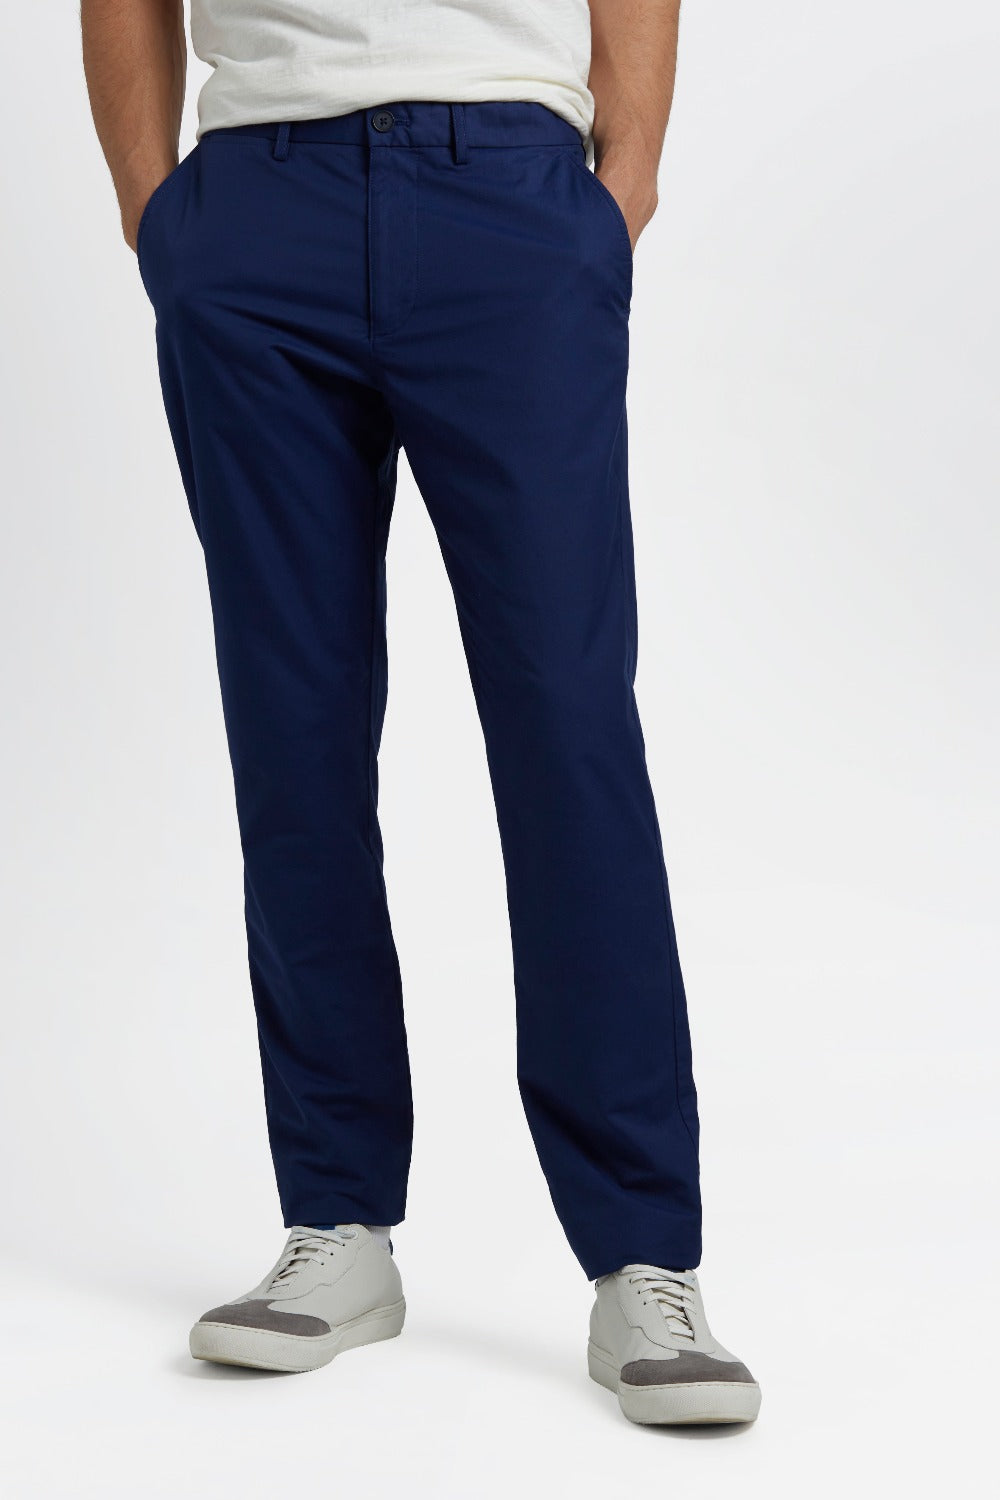 Men's Blue Chinos – Slim, Stretch & Relaxed Chino Pants – Express